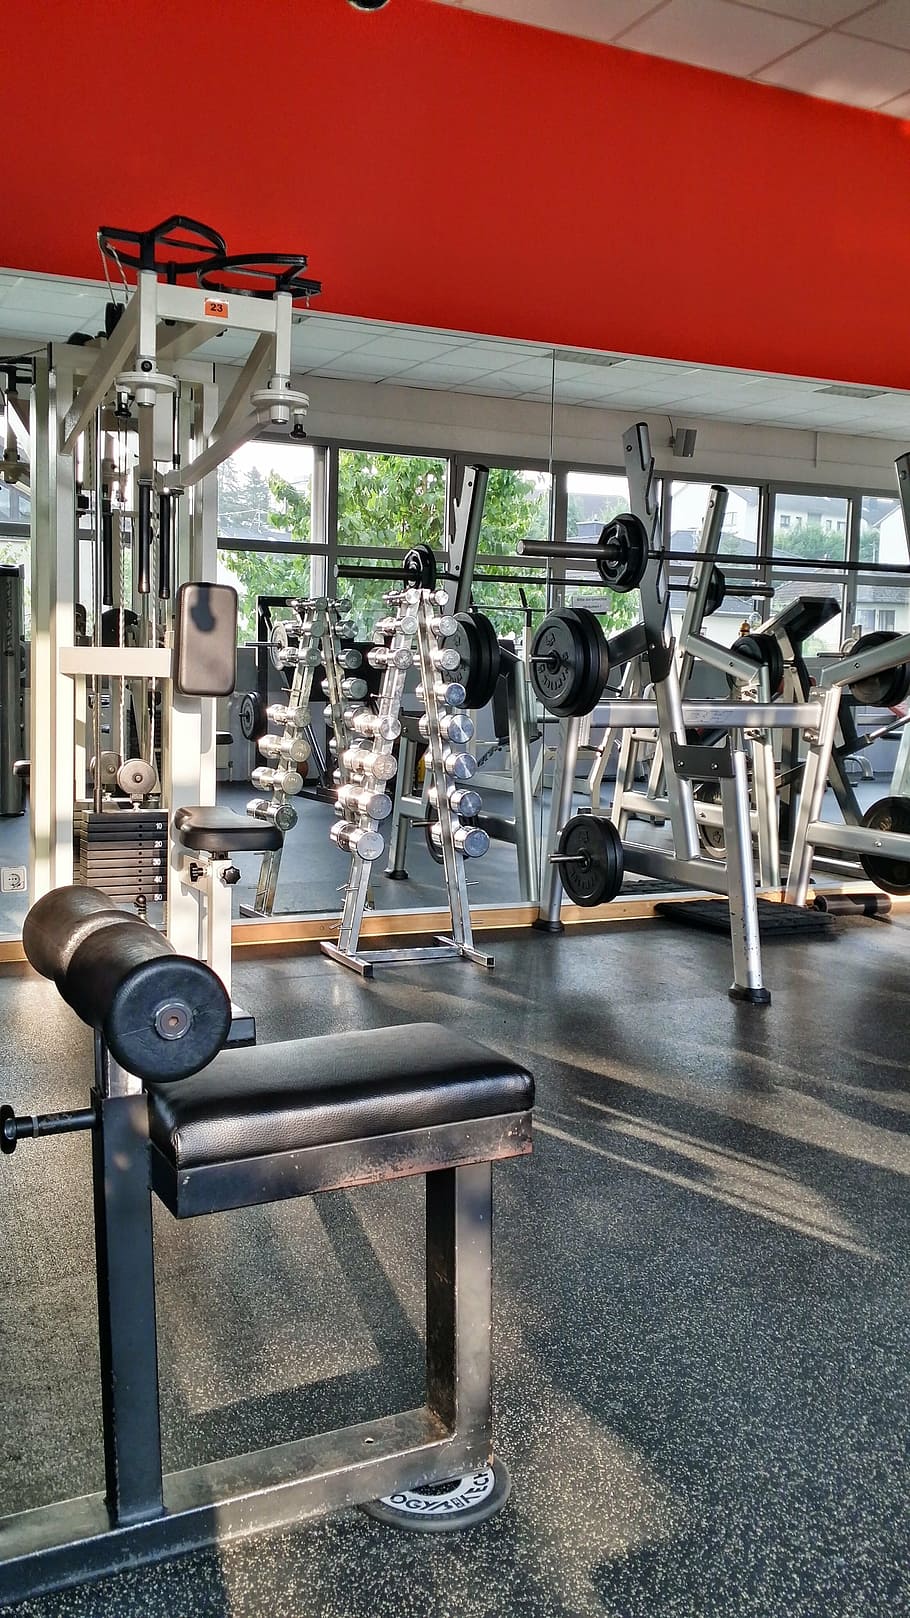 Gym Equipment Photos Download The BEST Free Gym Equipment Stock Photos   HD Images